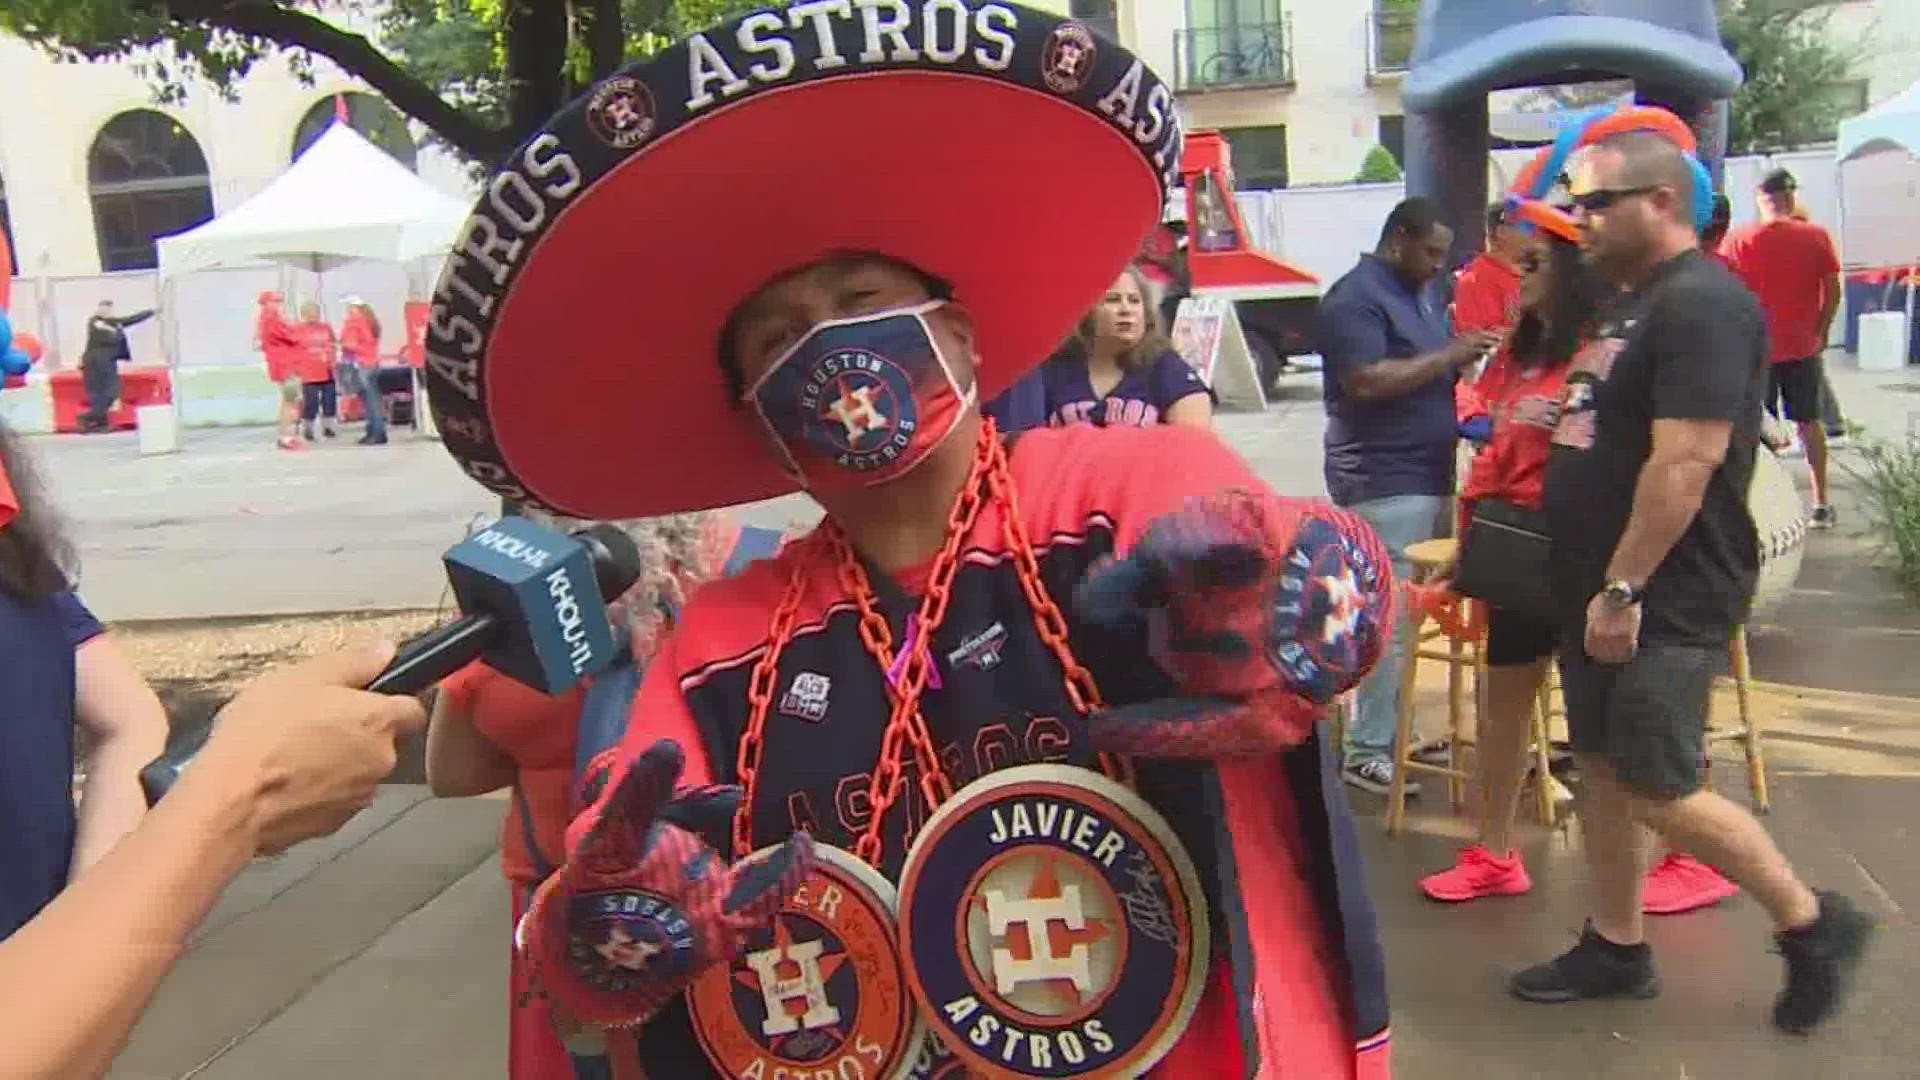 Ahead of Game 1 of the ALCS, fans share their most memorable Astros stories.